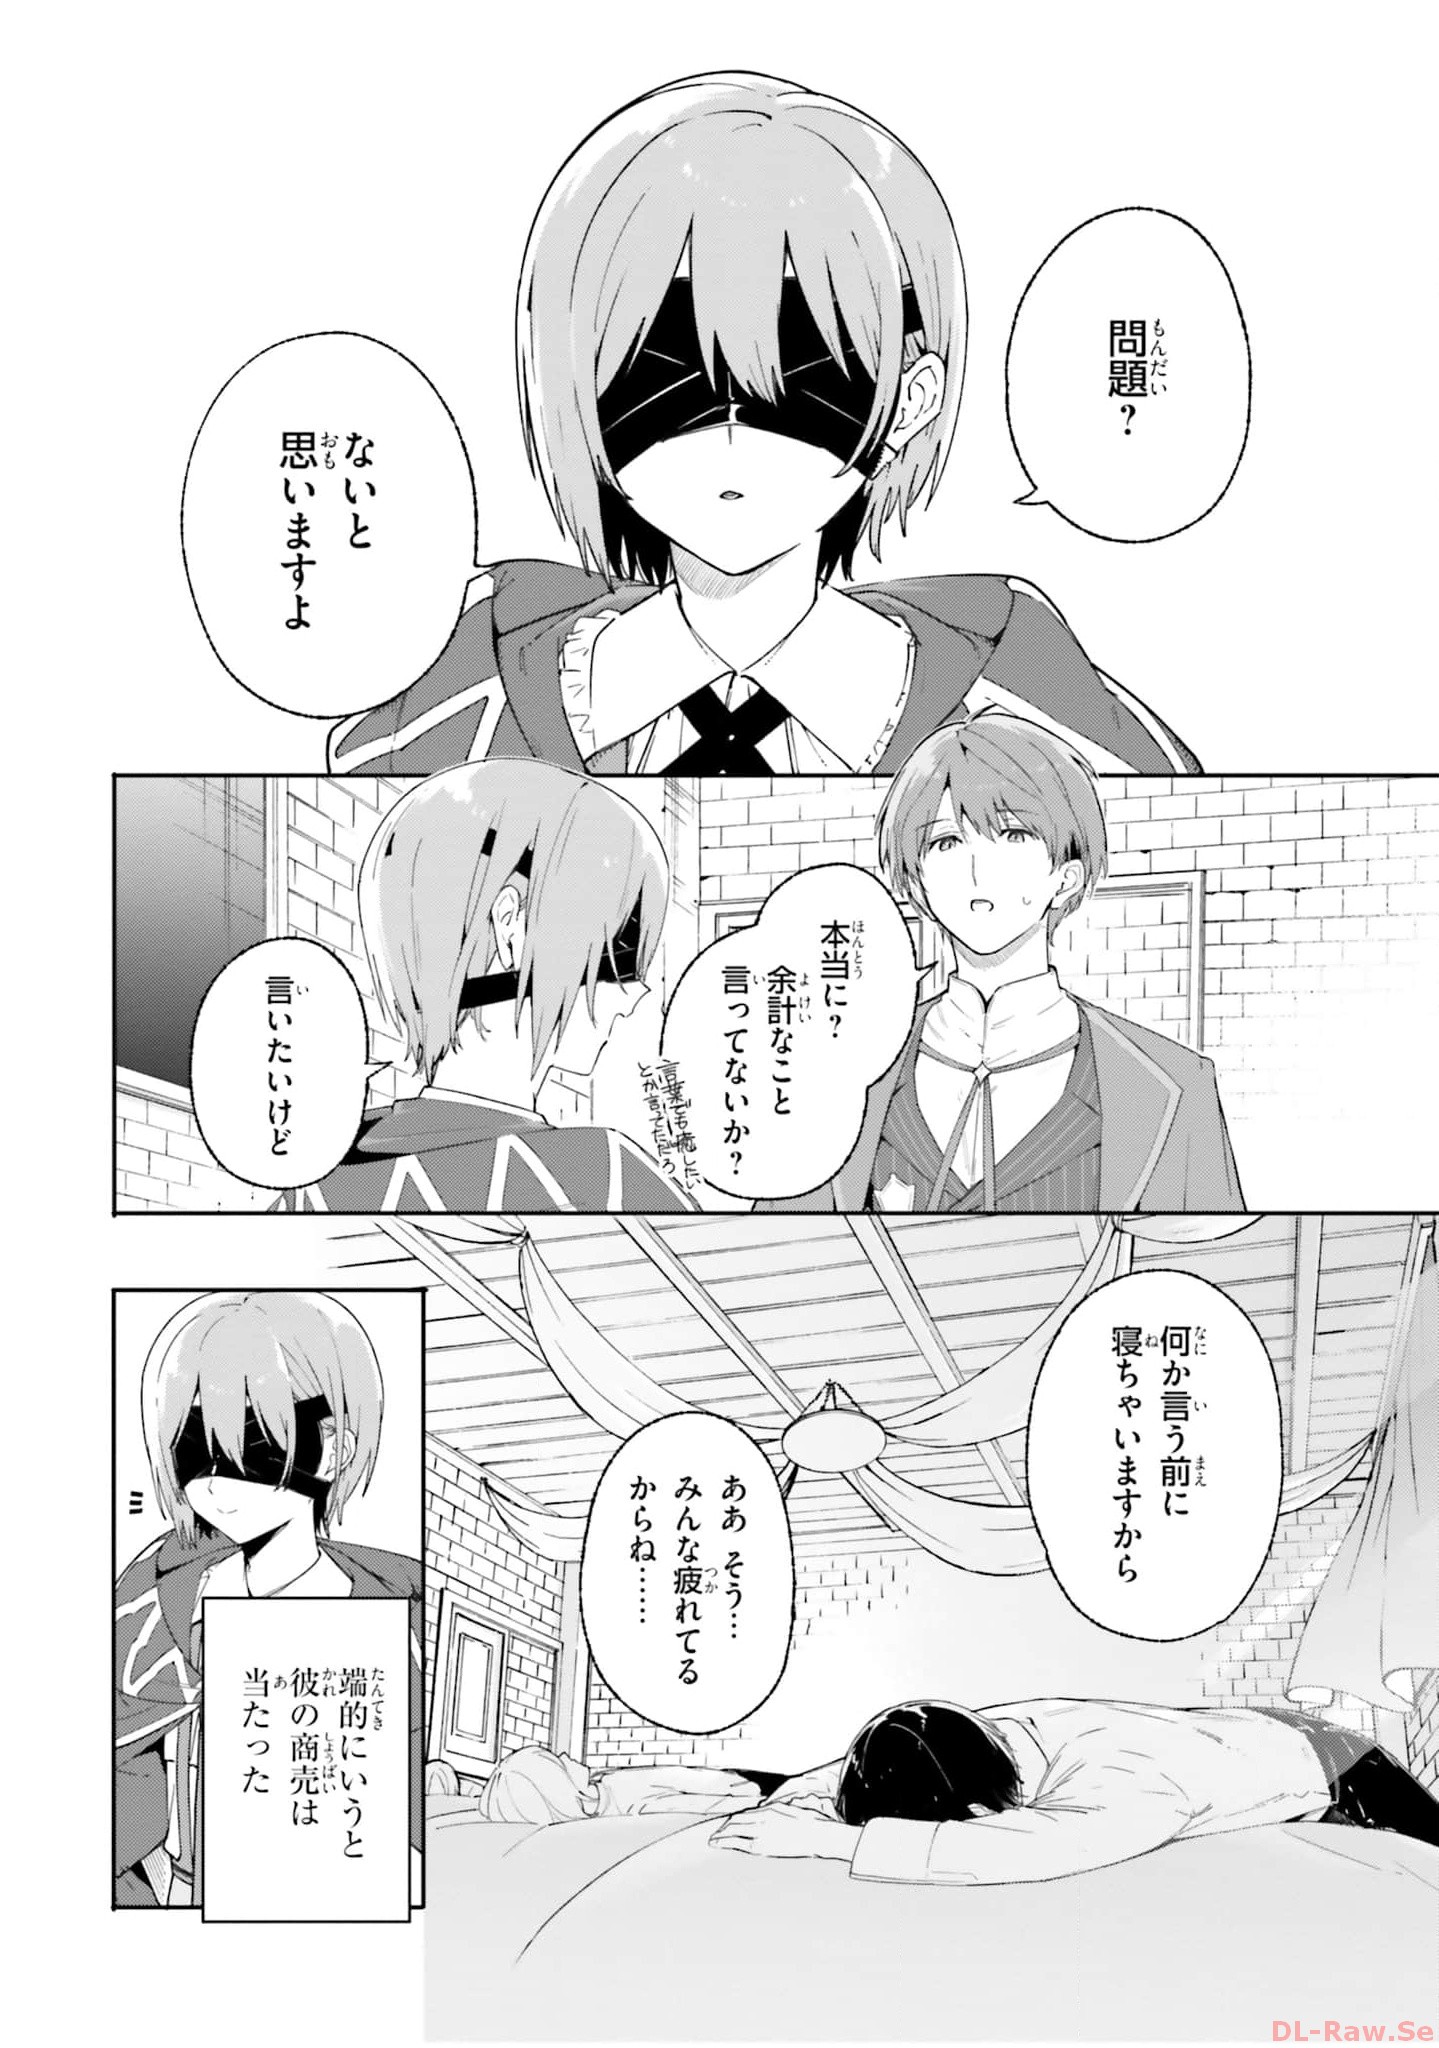 Kunon the Sorcerer Can See Kunon the Sorcerer Can See Through 魔術師クノンは見えている 第19話 - Page 2